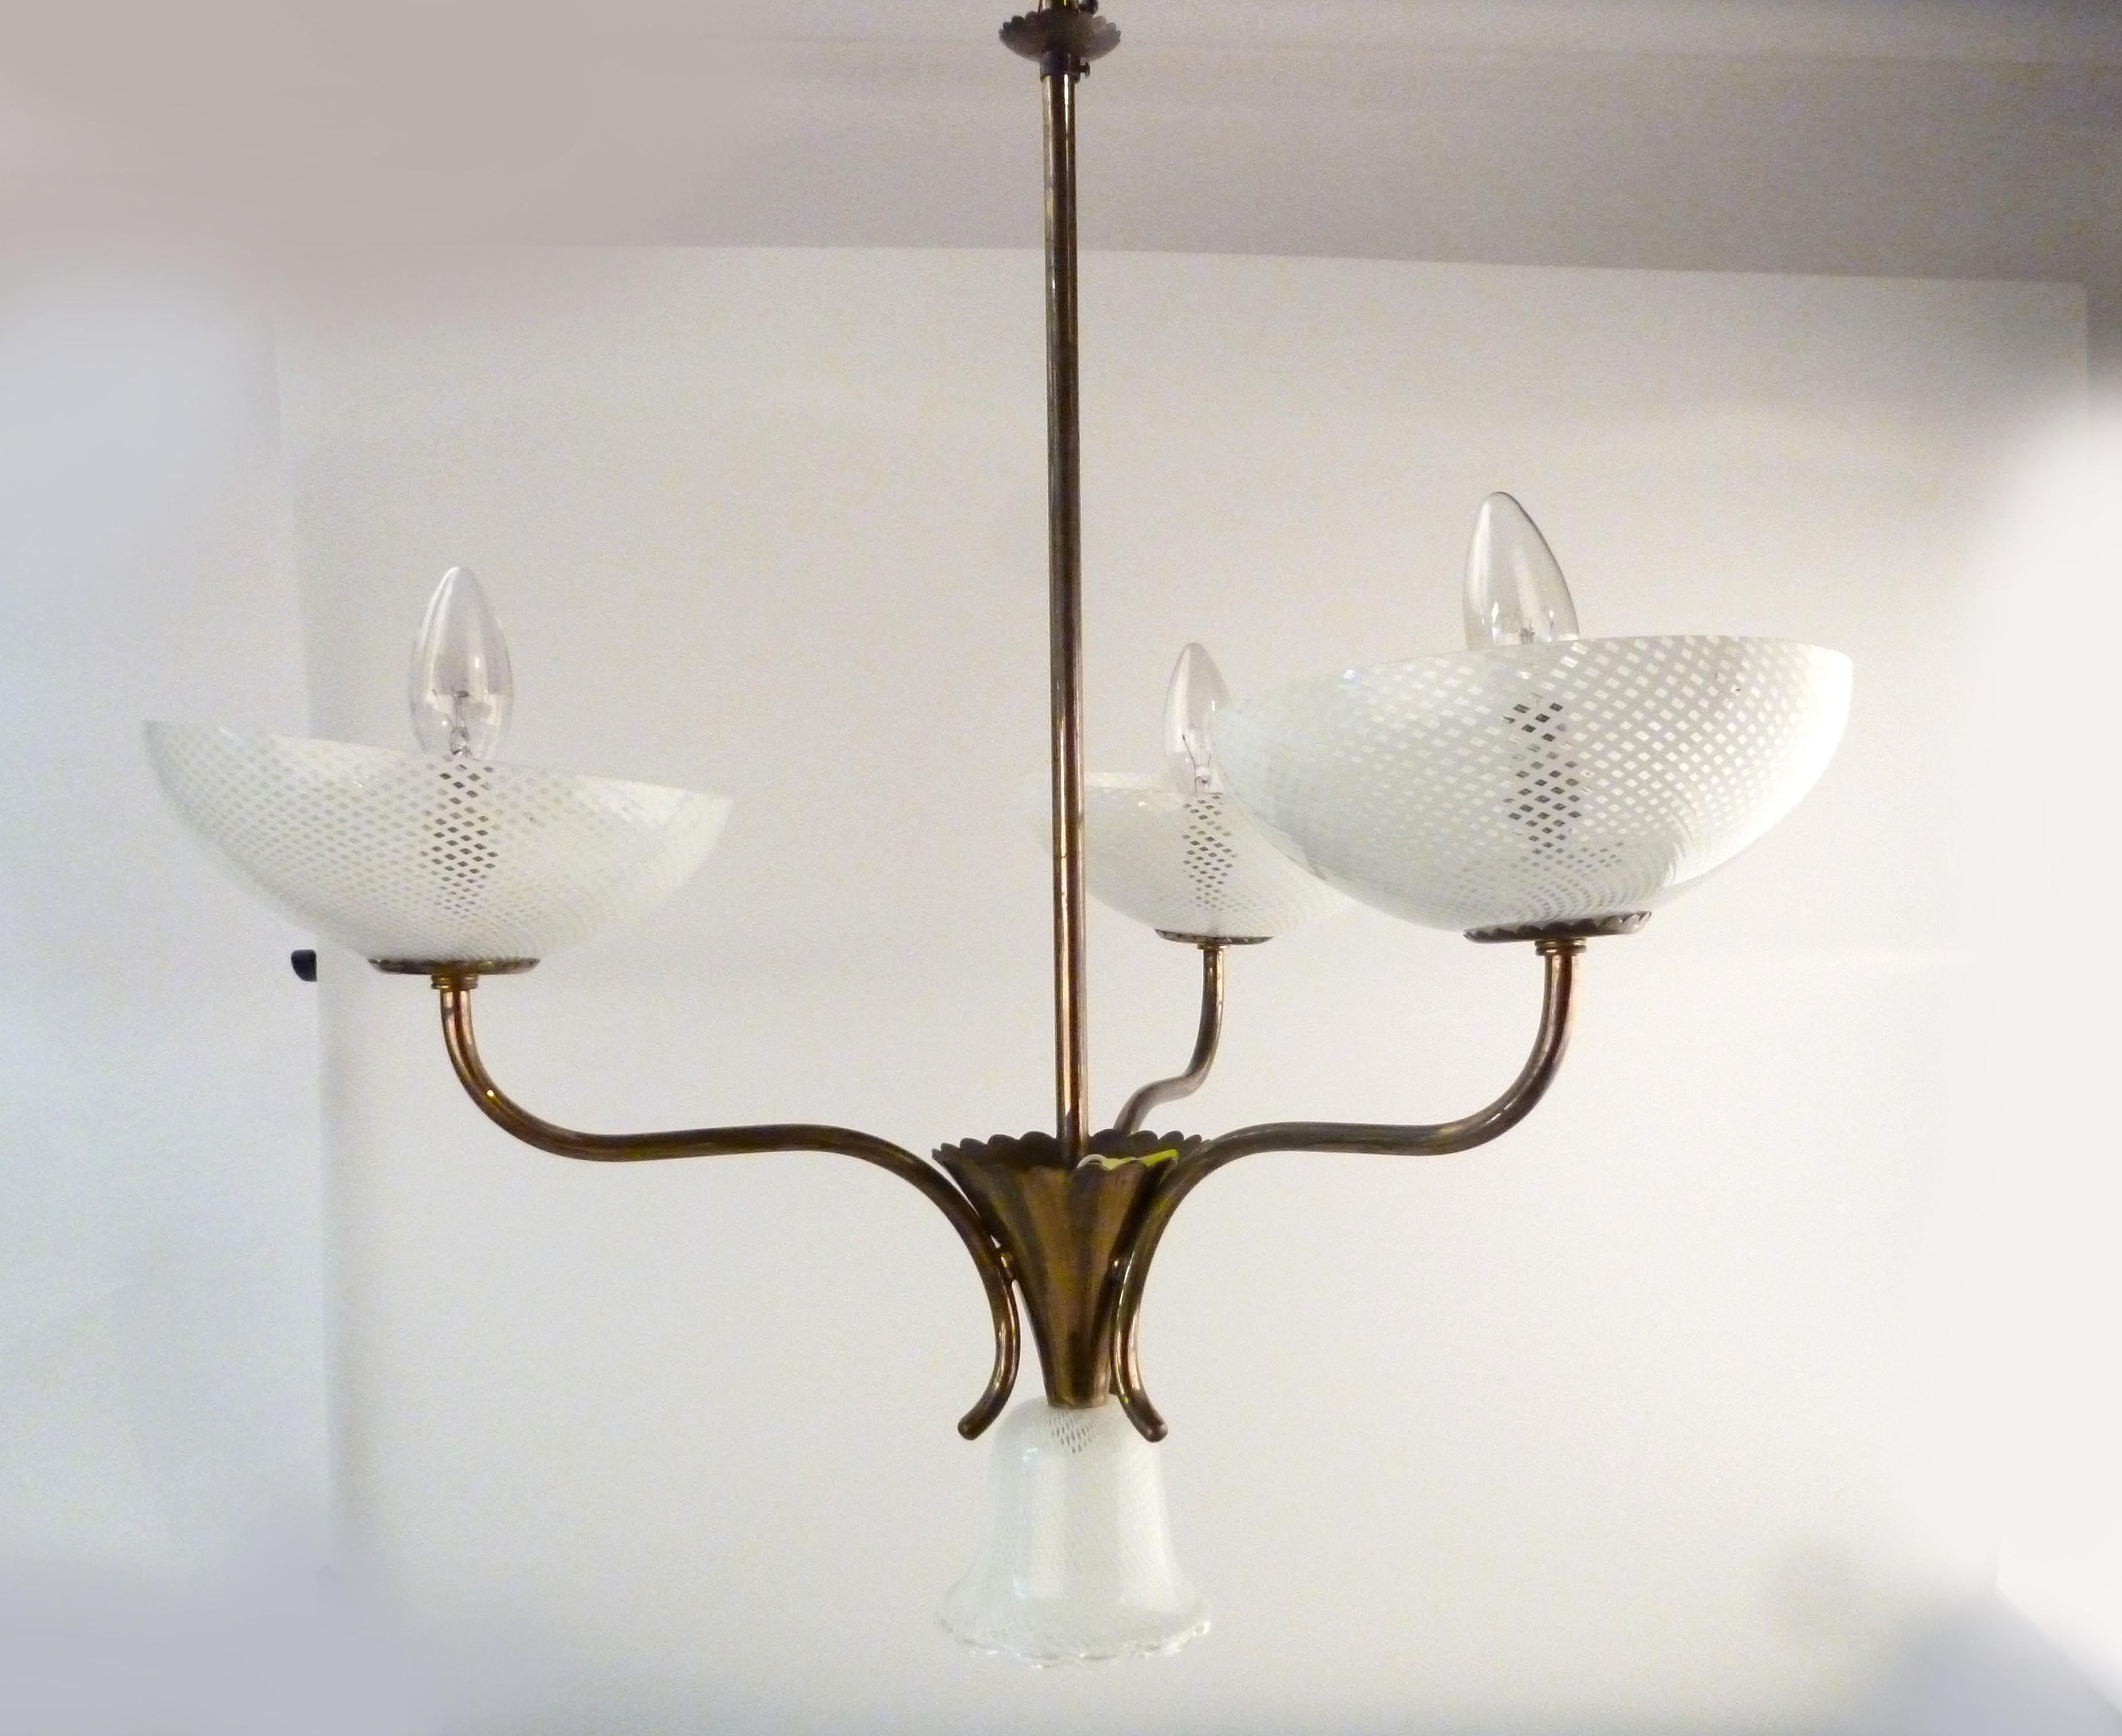 1950s Italian Seguso brass and Murano filigreed glass three-arm pendant light.
Wired for the U.S. and uses three 25 W-max European bulbs. Chain not included.